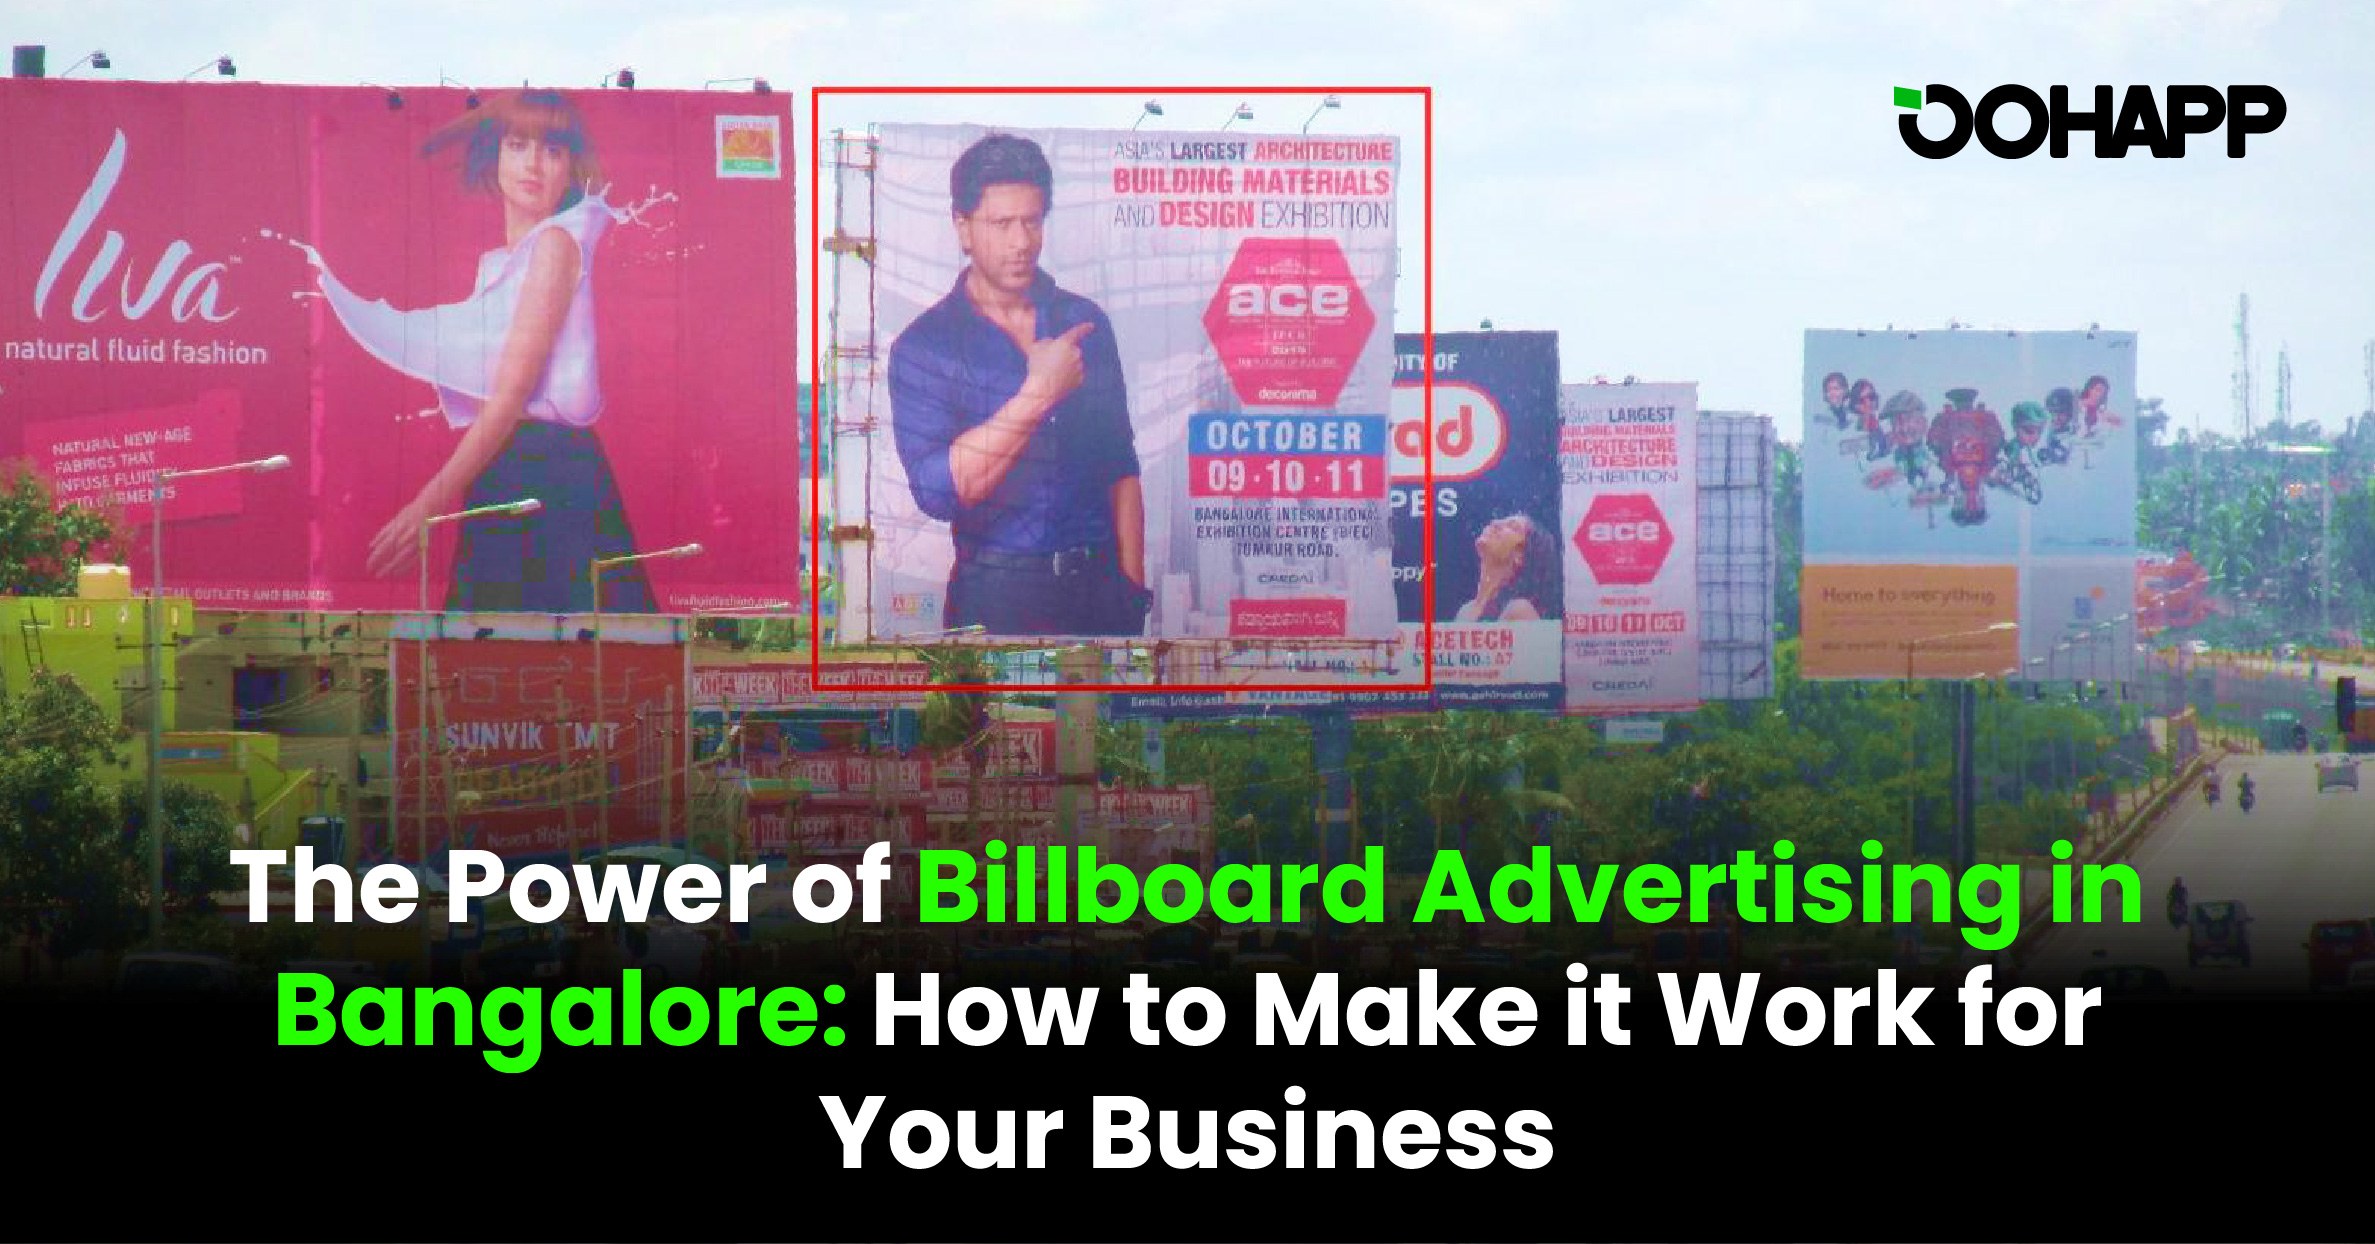 The Power of Billboard Advertising in Bangalore: How to Make it Work for Your Business